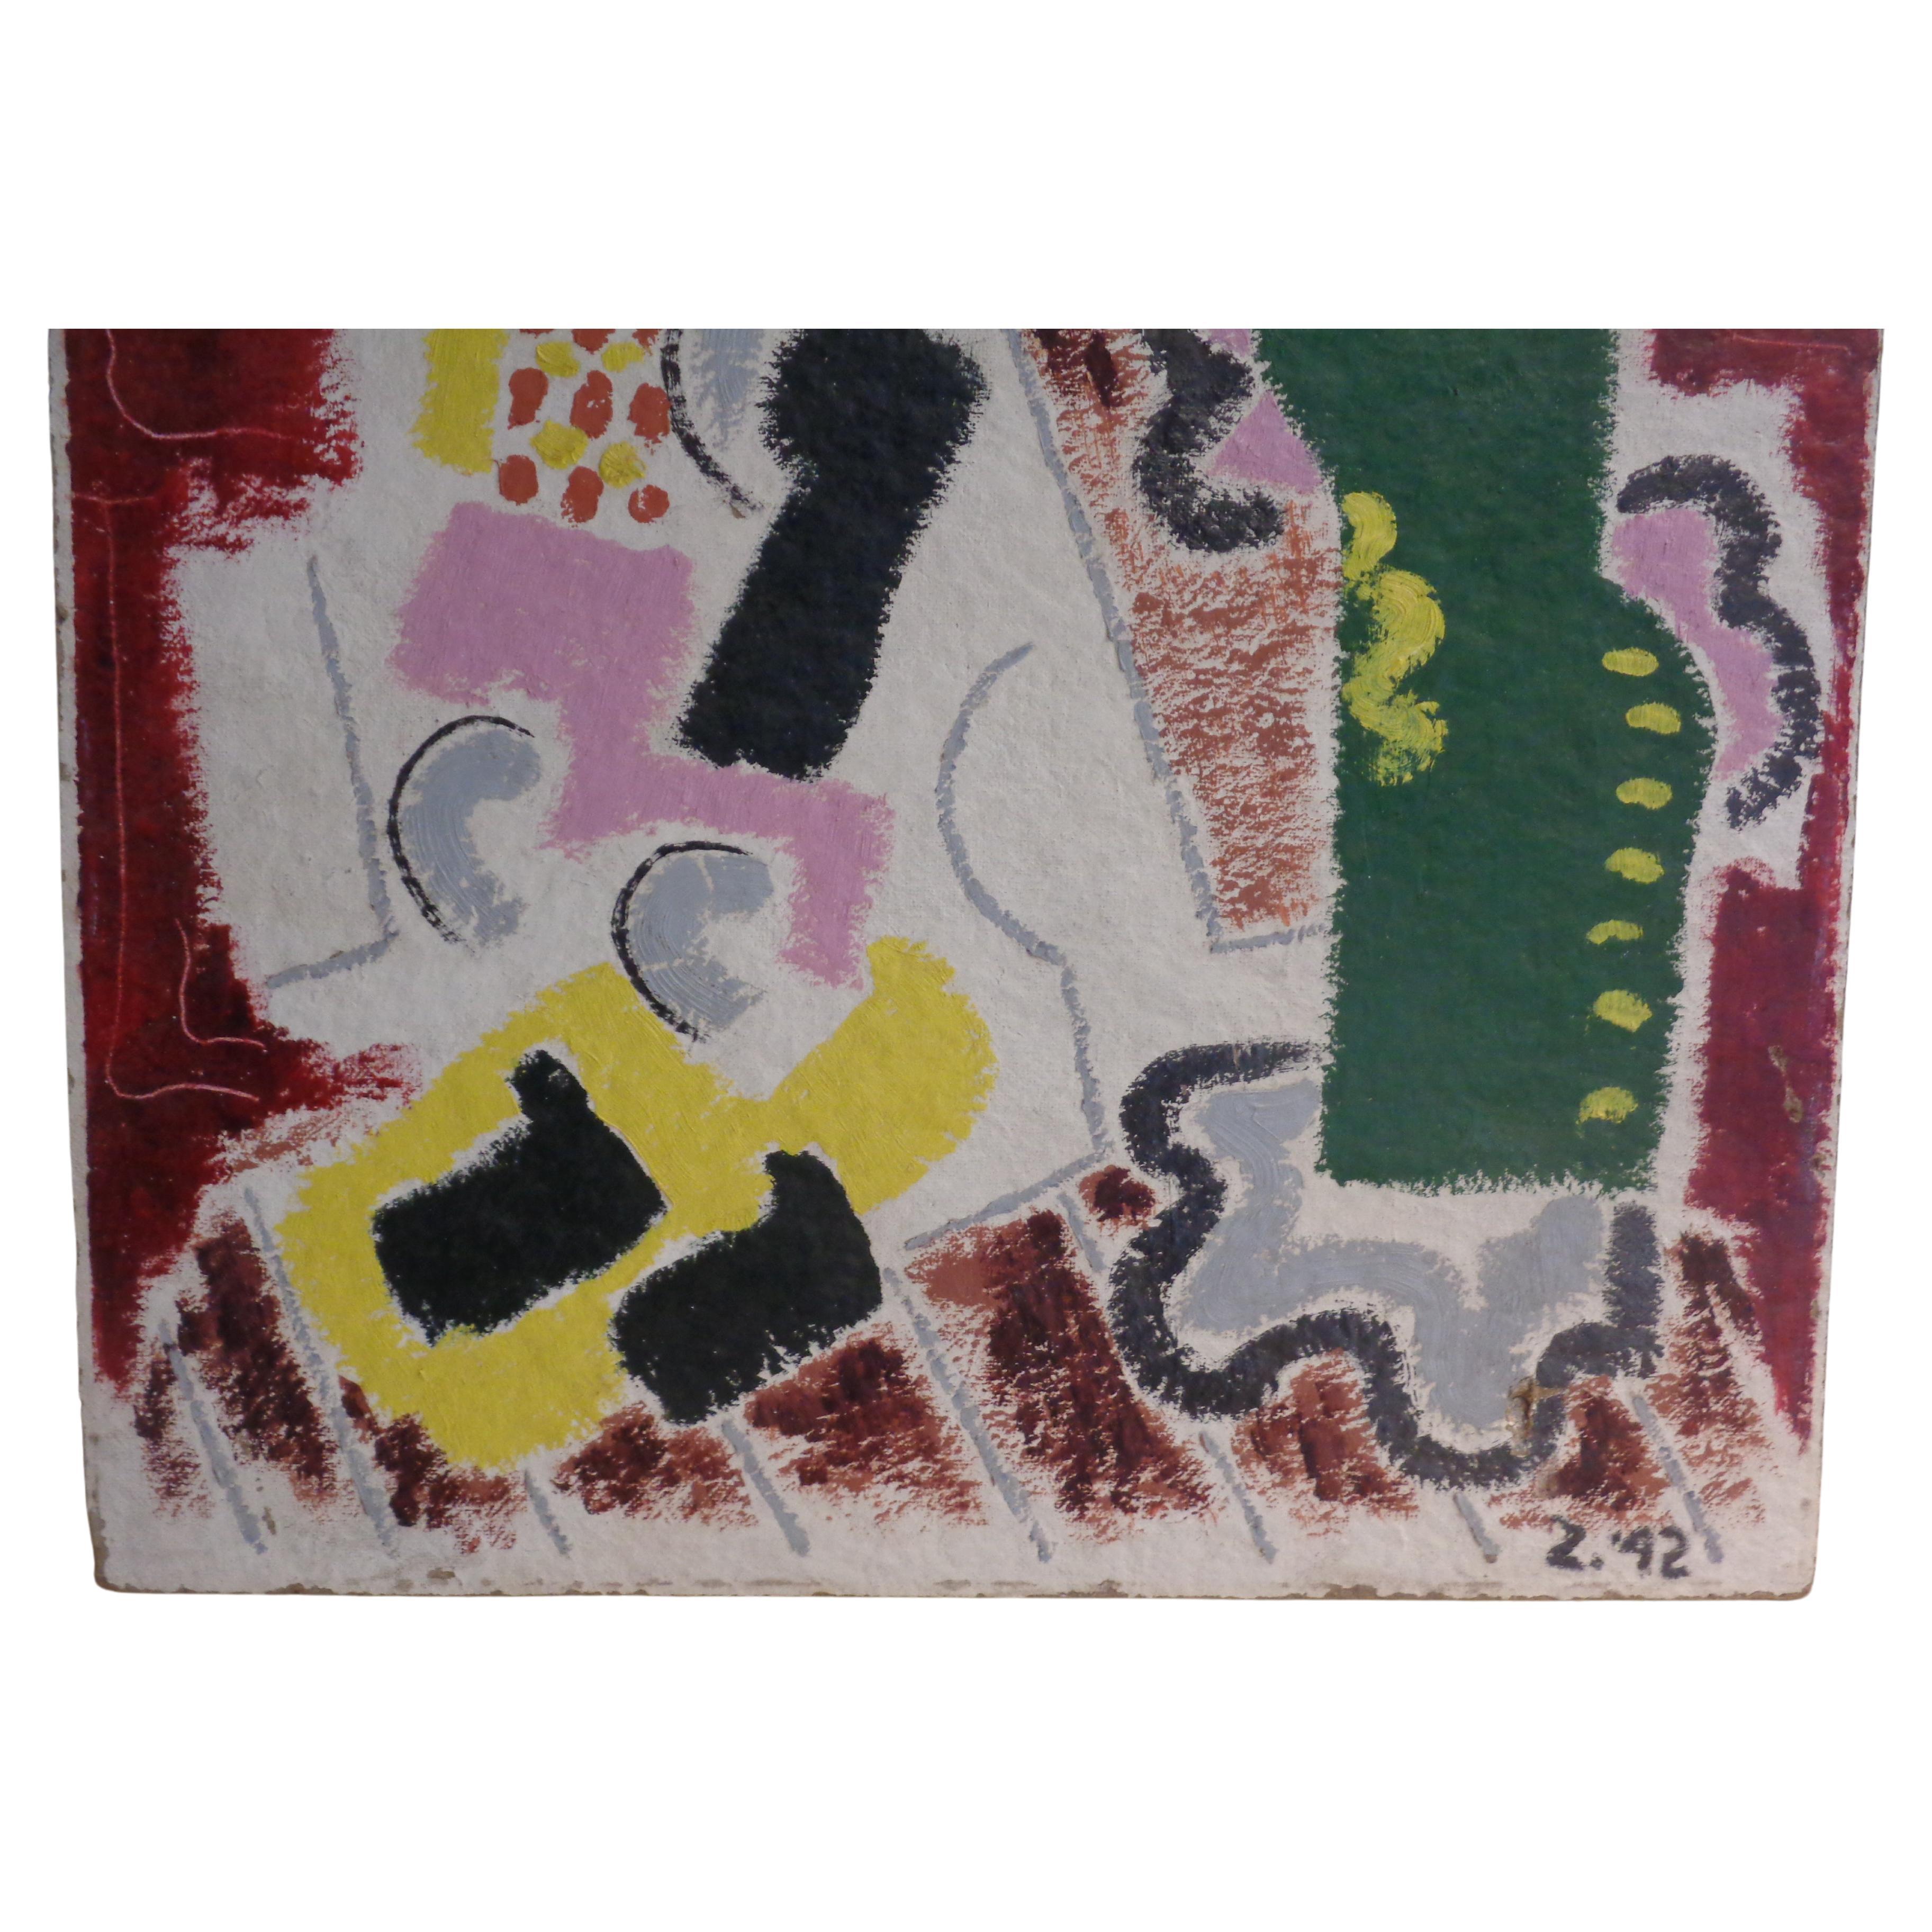 American Primitive Figural Abstract Painting - Zoute 1942 For Sale